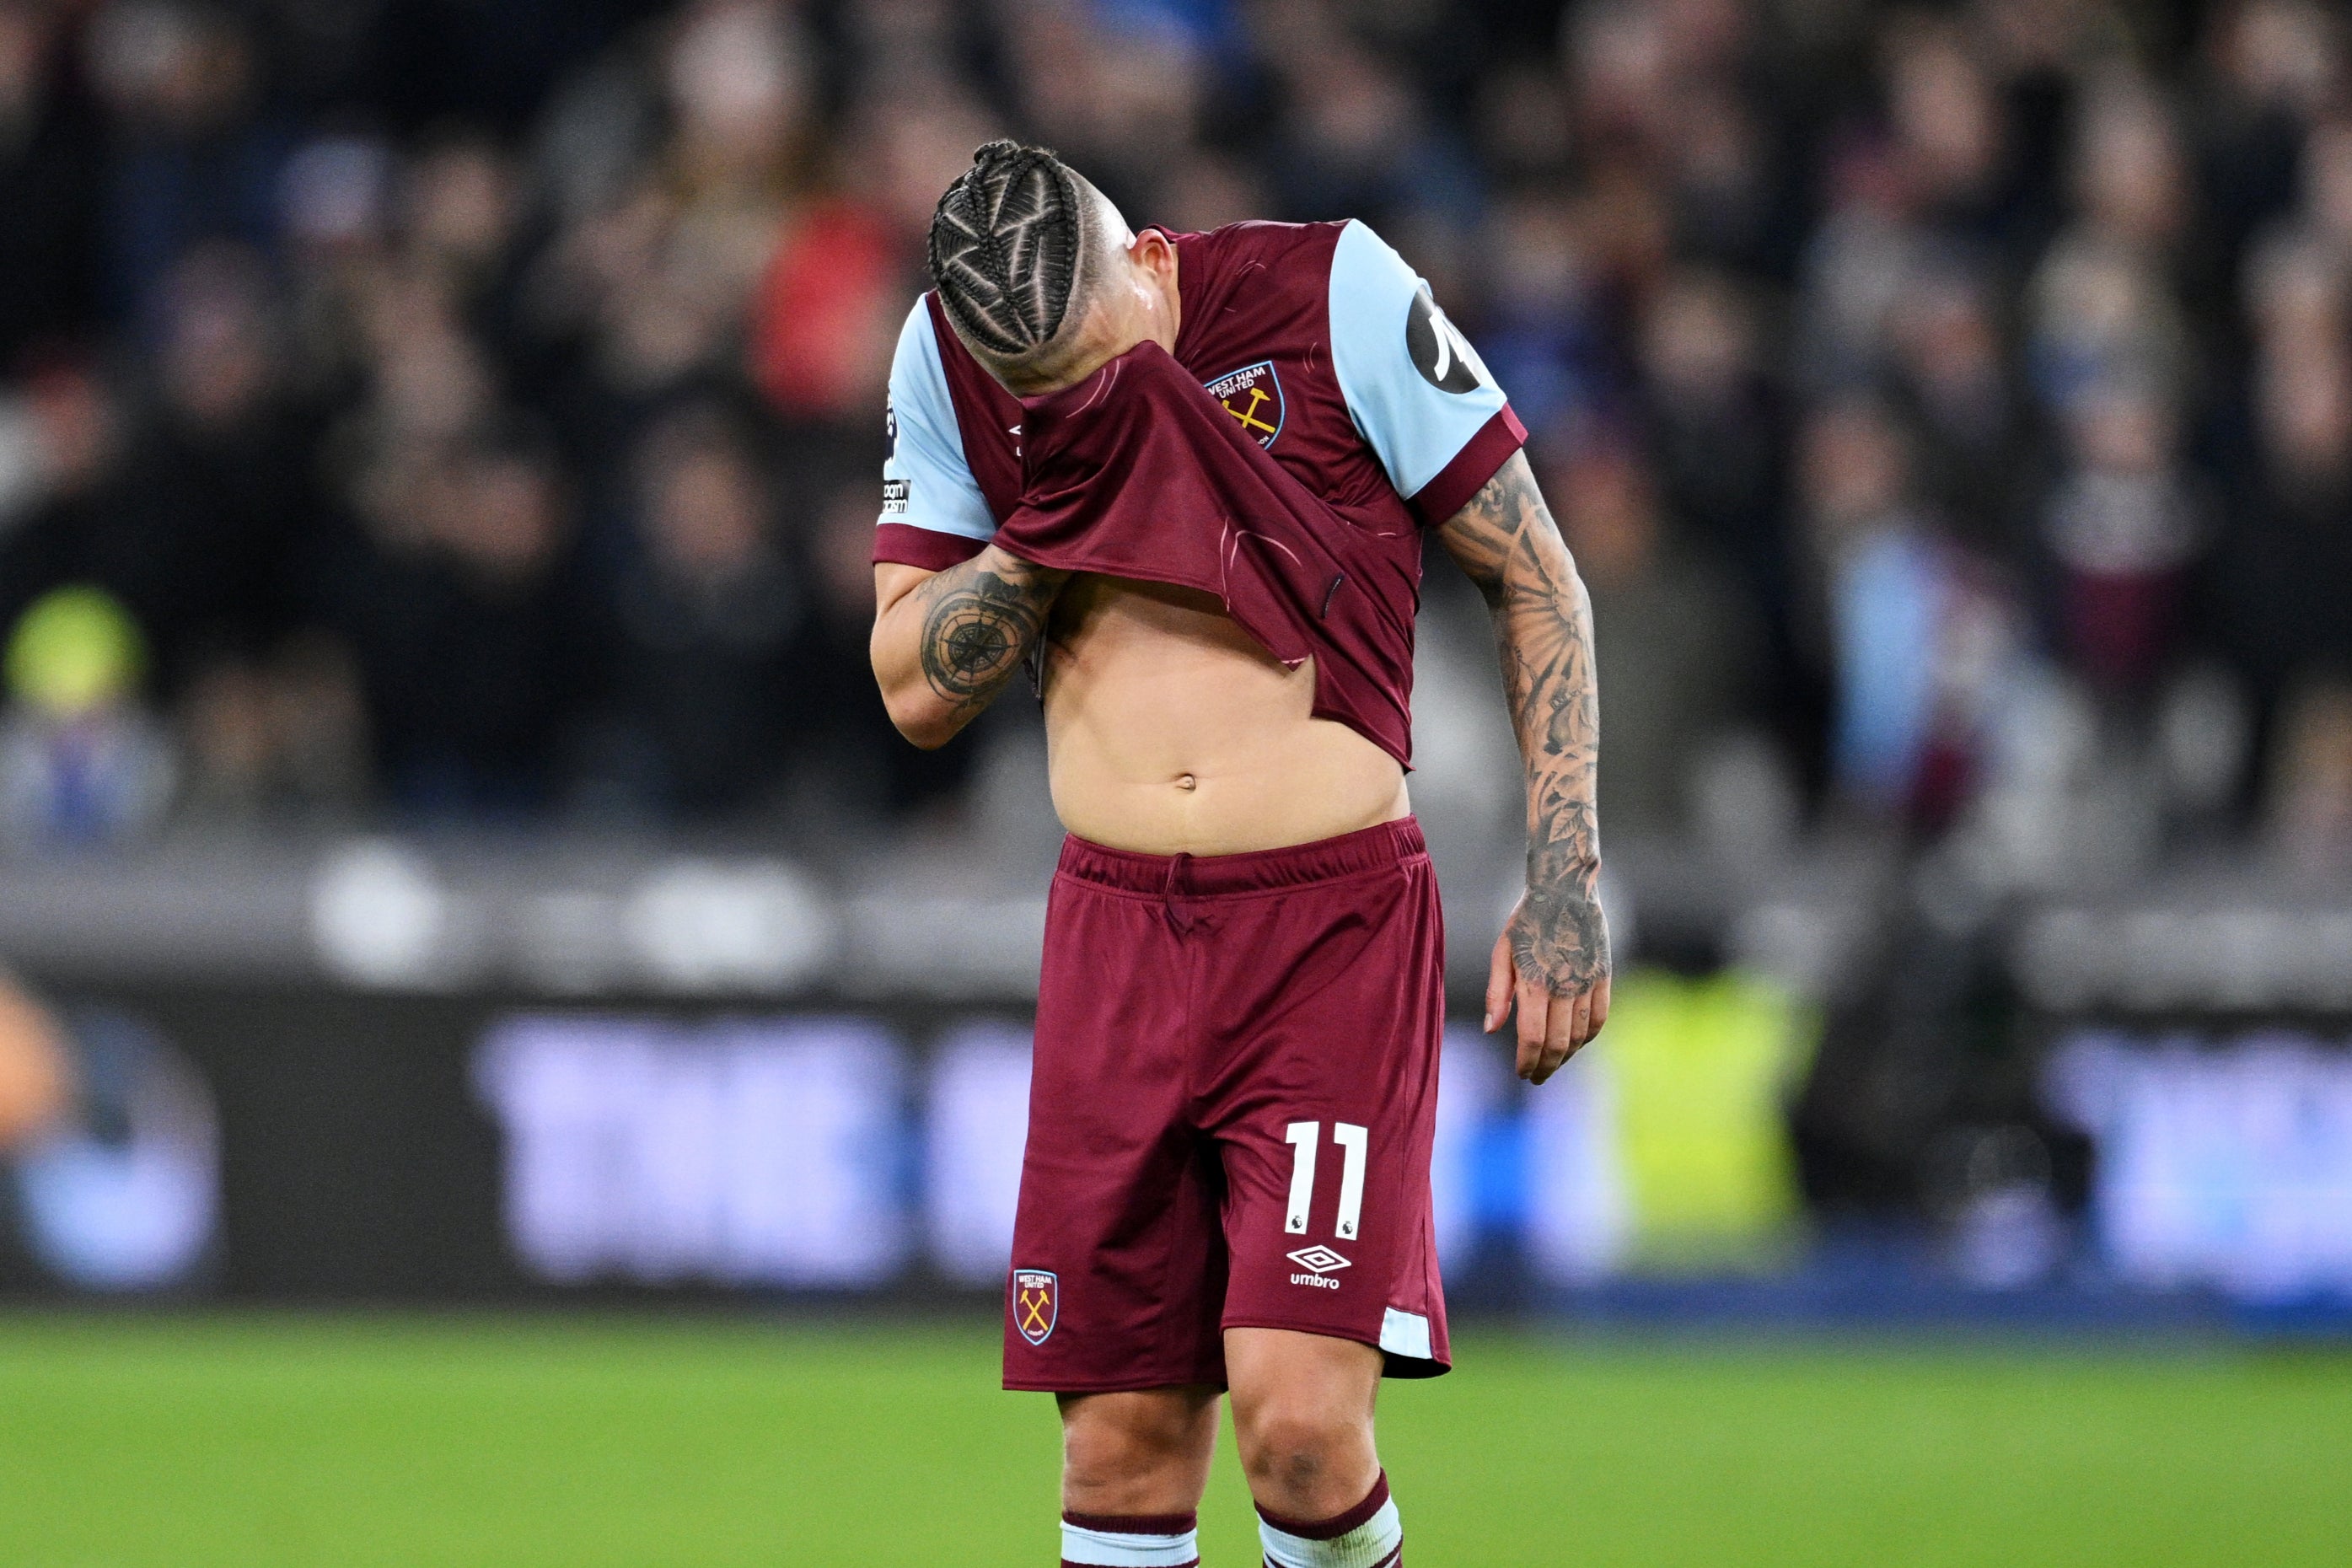 Kalvin Phillips made a huge error with his first touch as a West Ham player